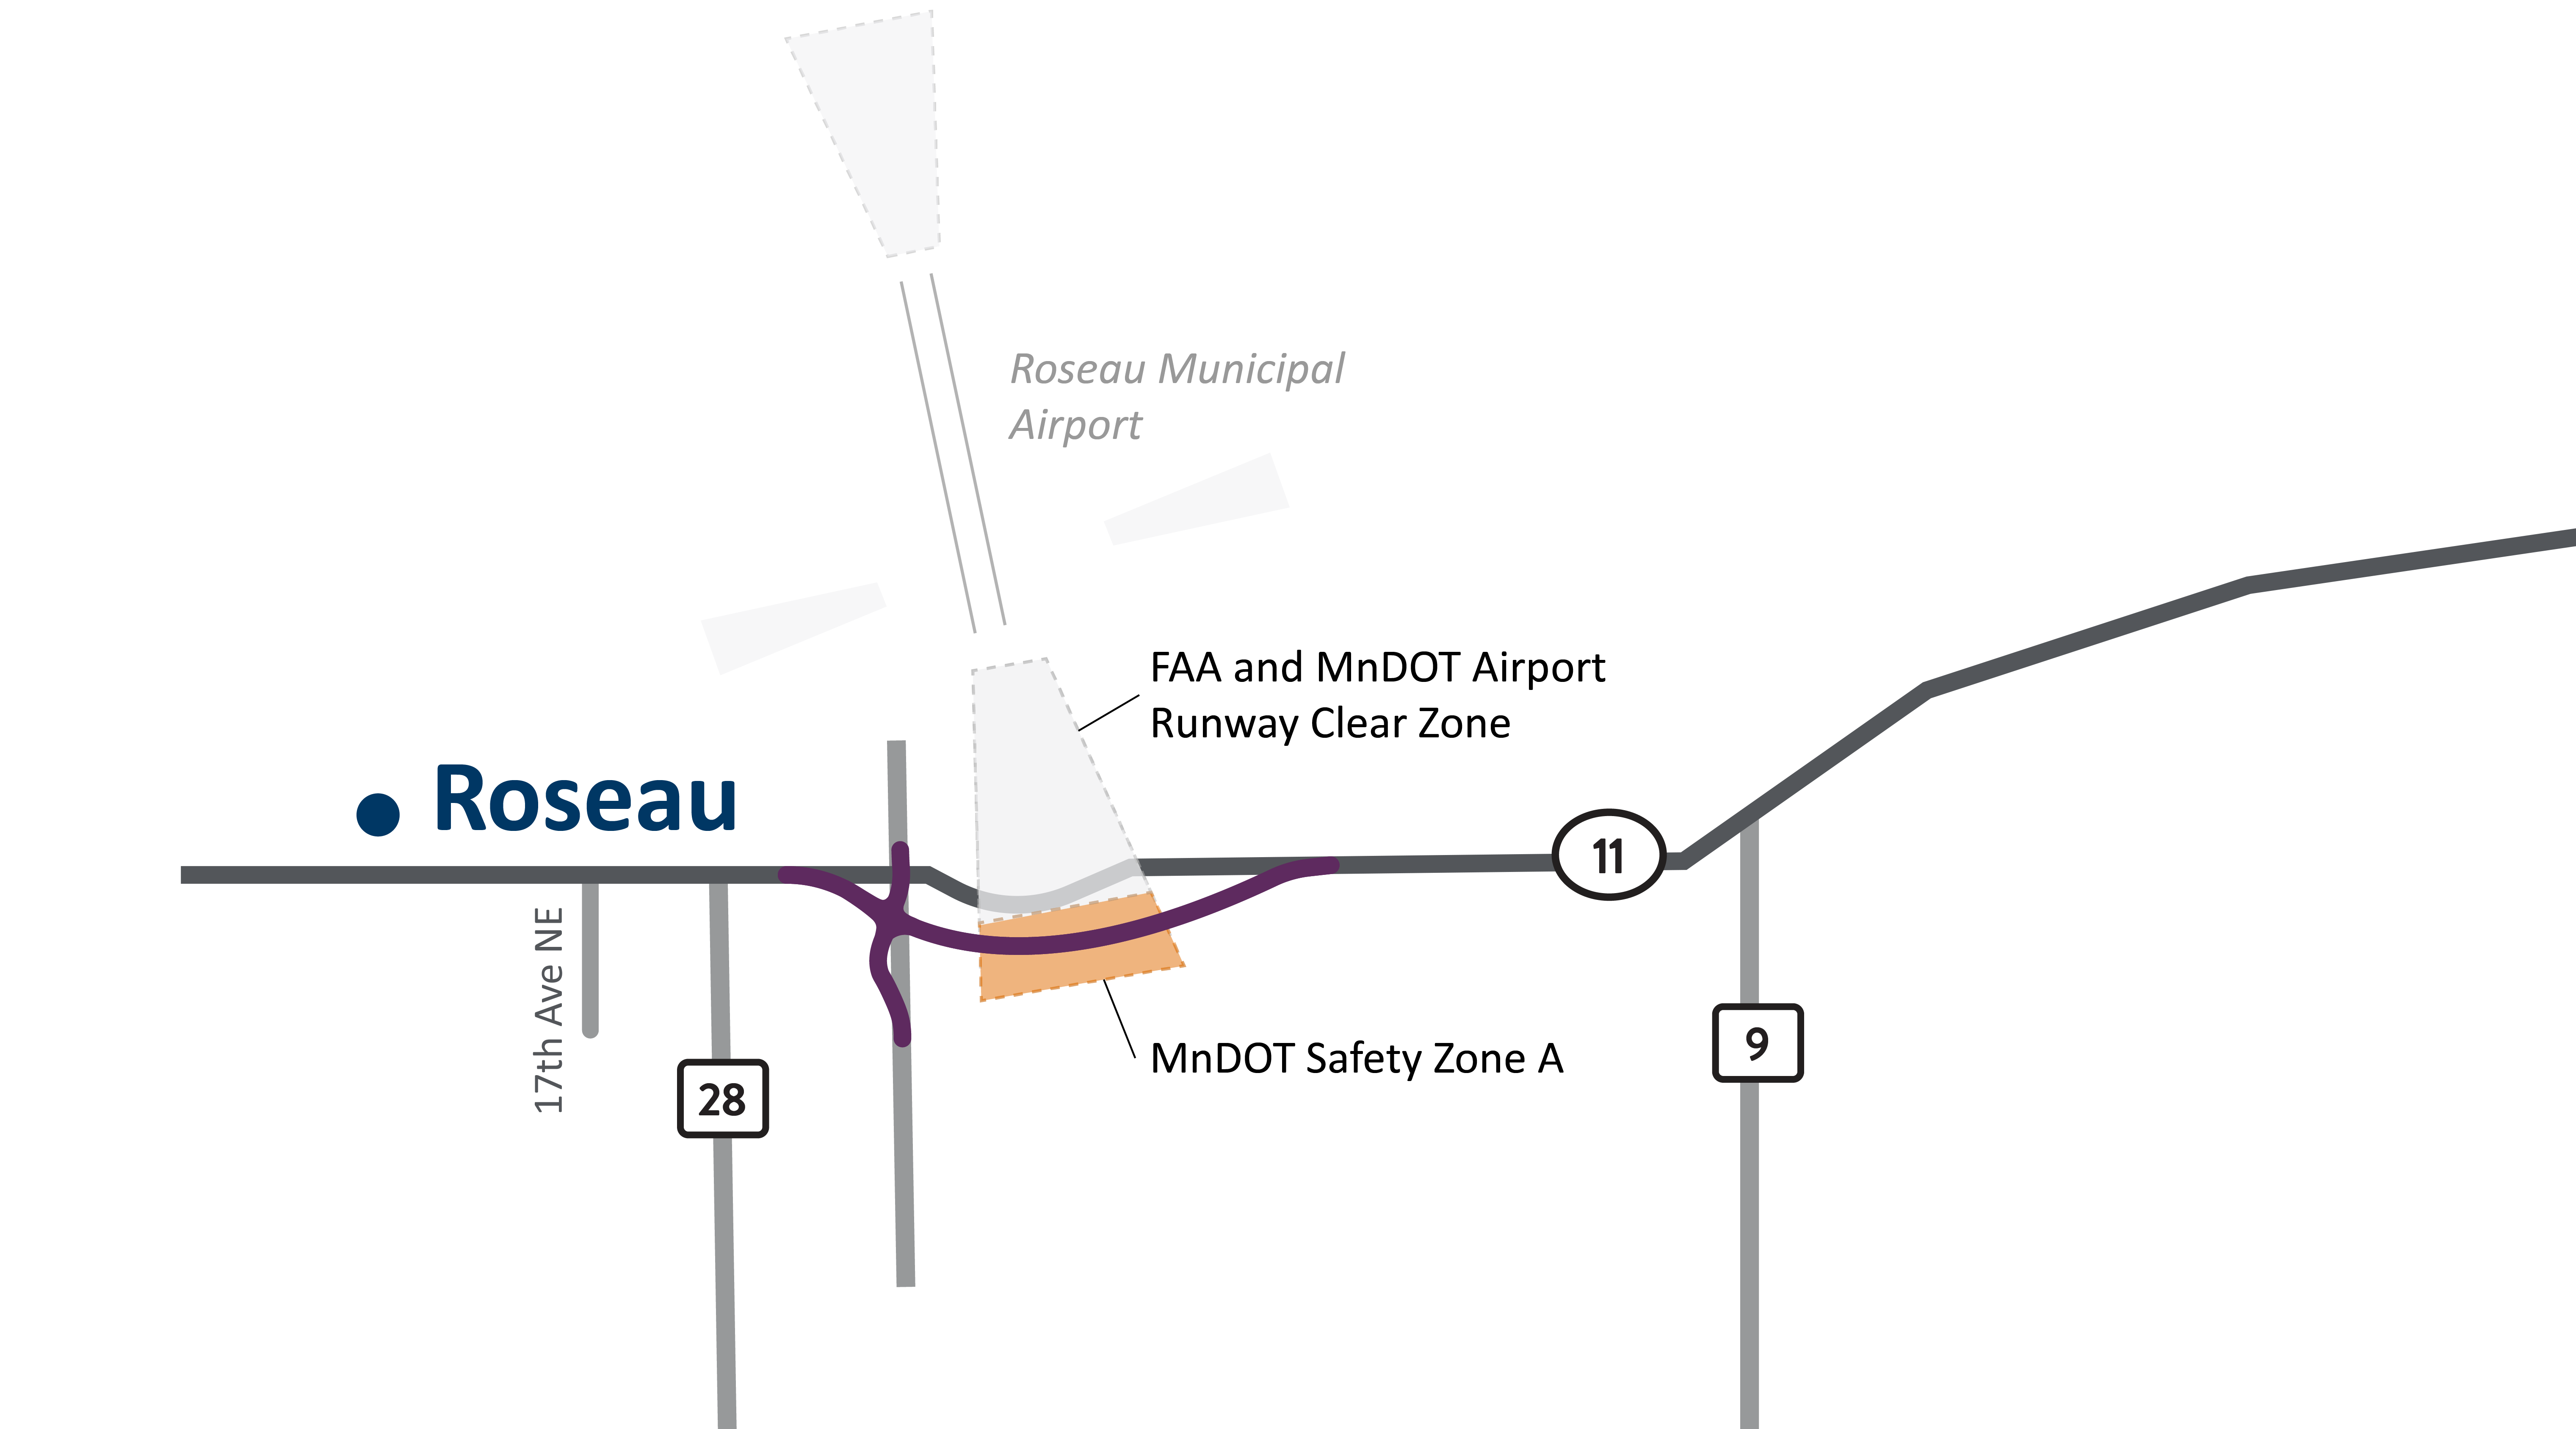 Recommended improvements to Roseau area